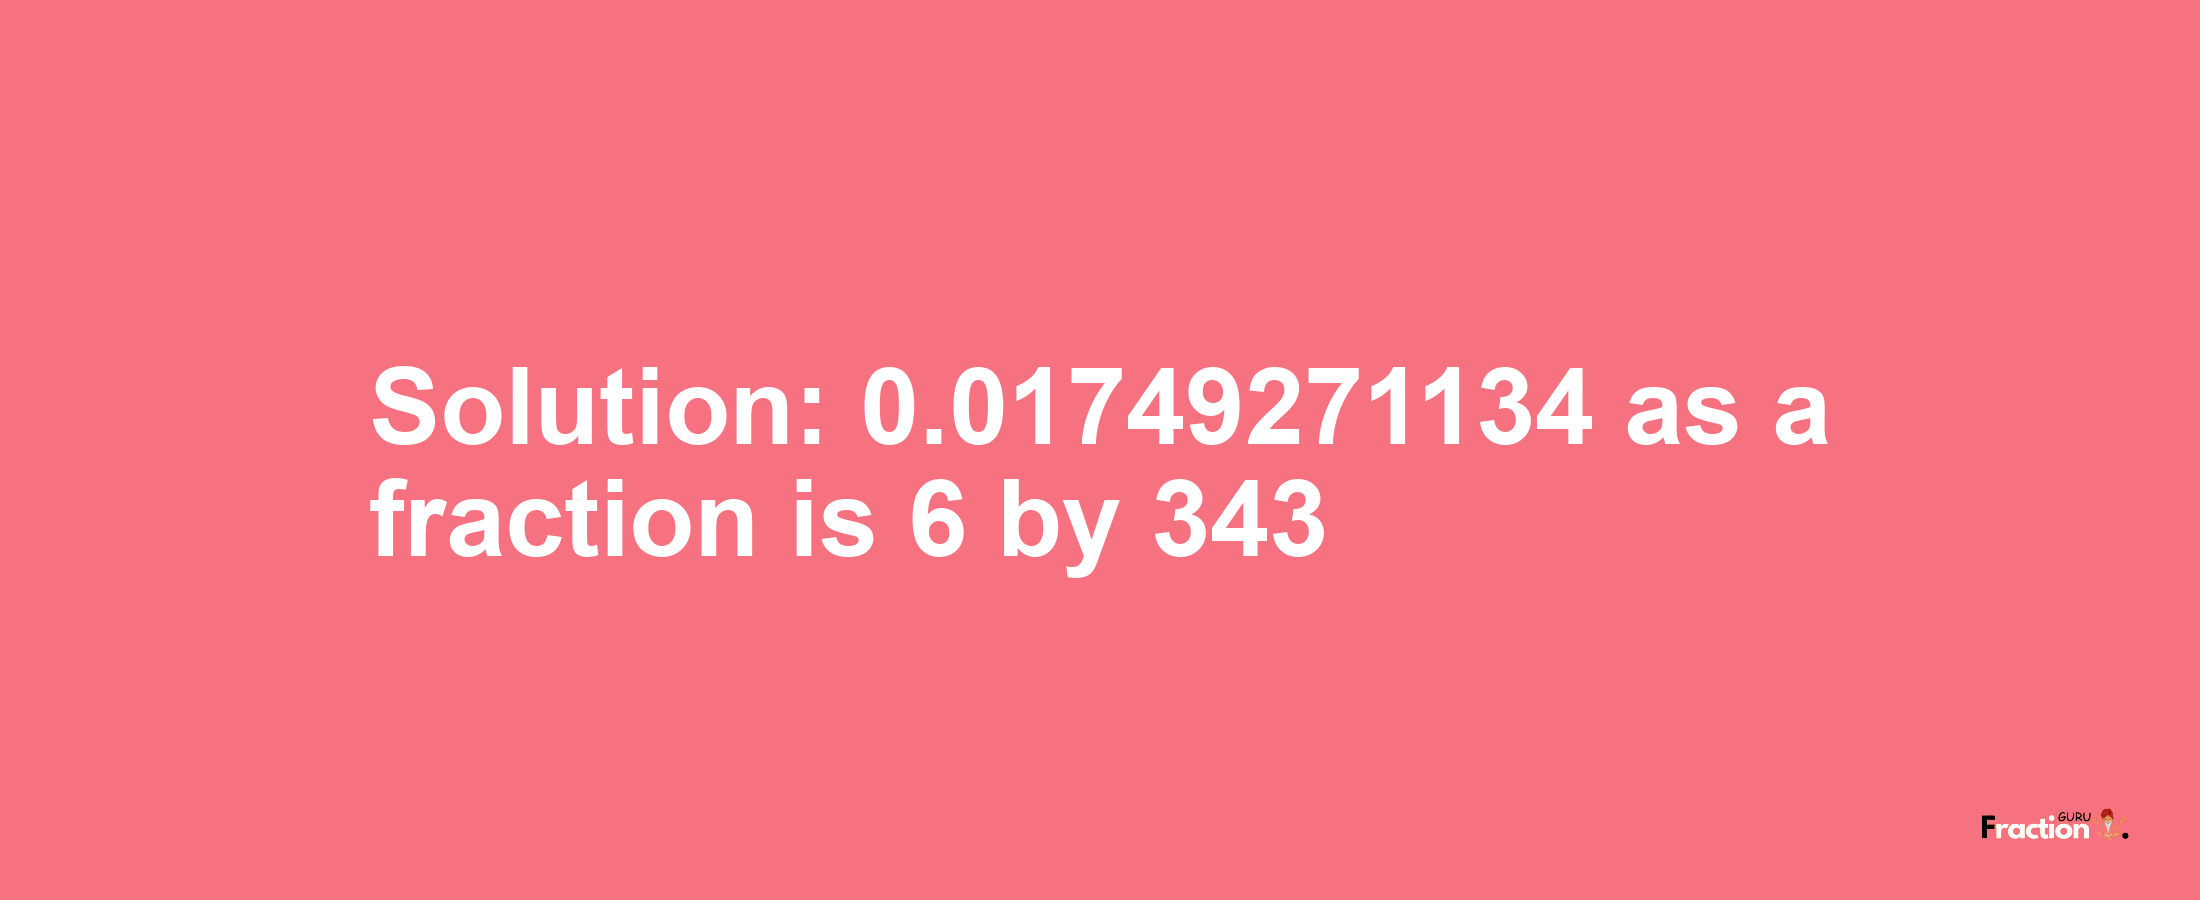 Solution:0.01749271134 as a fraction is 6/343